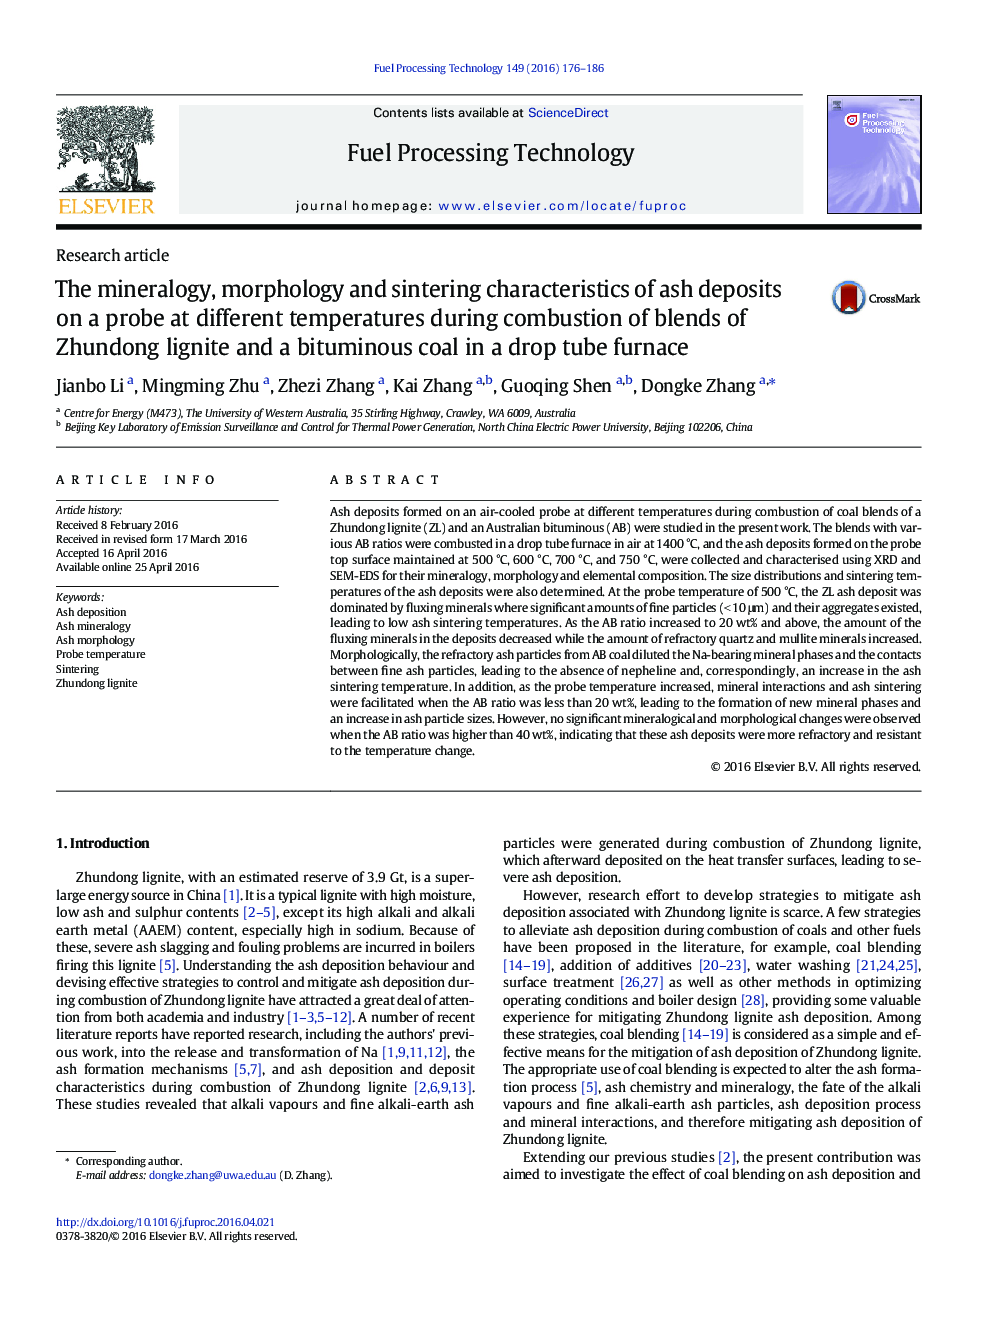 The mineralogy, morphology and sintering characteristics of ash deposits on a probe at different temperatures during combustion of blends of Zhundong lignite and a bituminous coal in a drop tube furnace